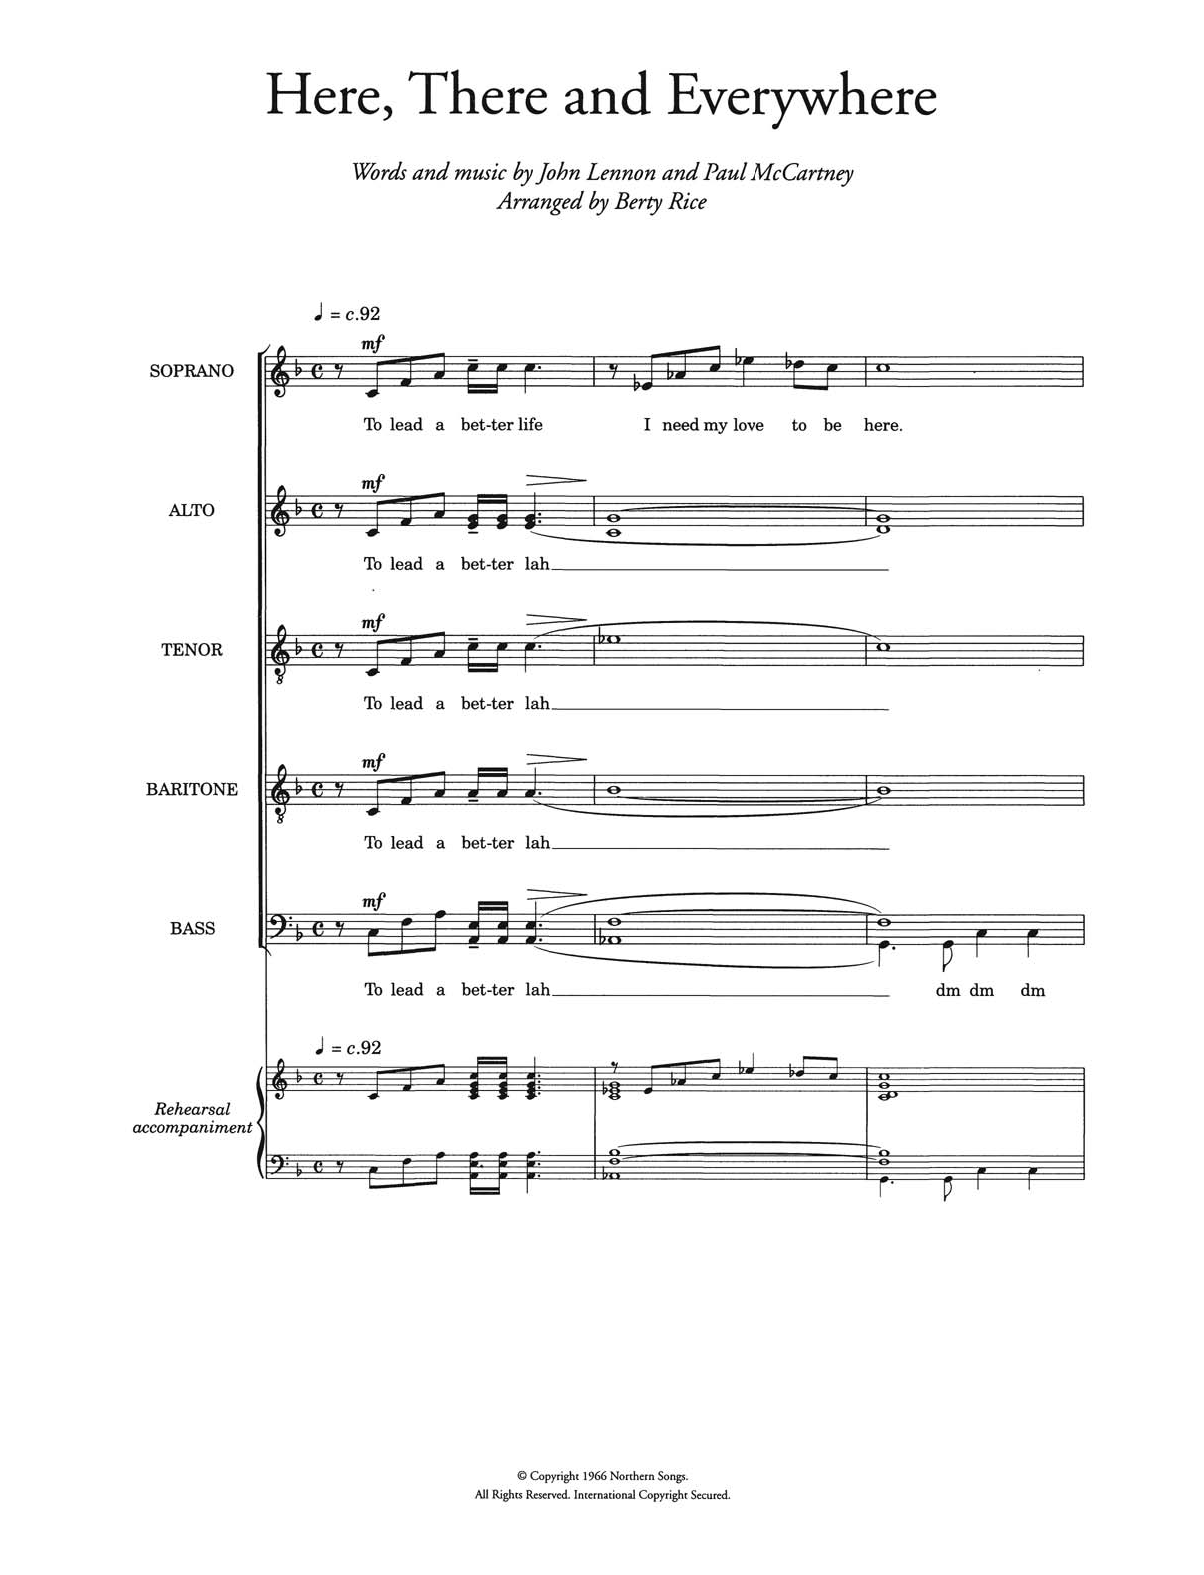 Download The Beatles Here, There And Everywhere (arr. Berty Sheet Music